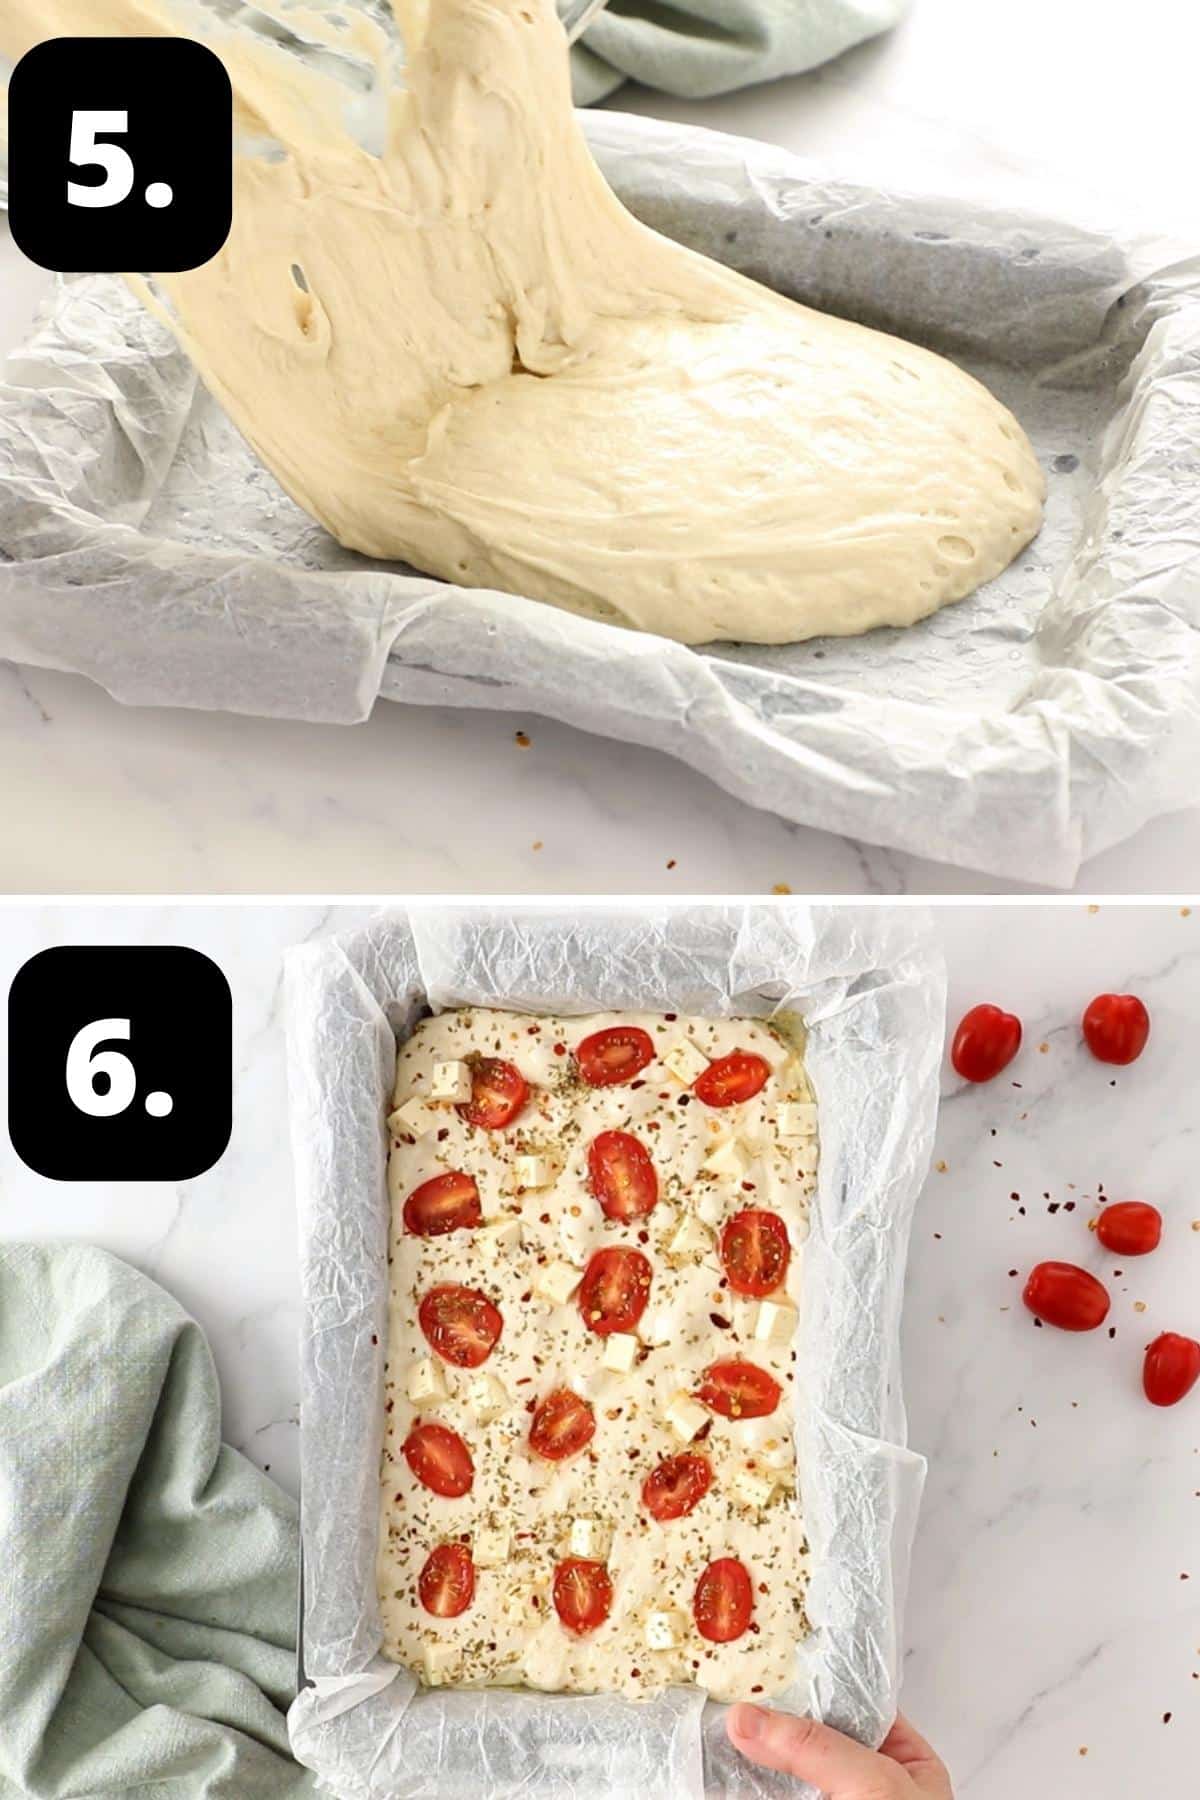 Steps 5-6 of preparing this recipe - tipping the dough into the pan and the dough topped with tomato and feta, ready to bake.